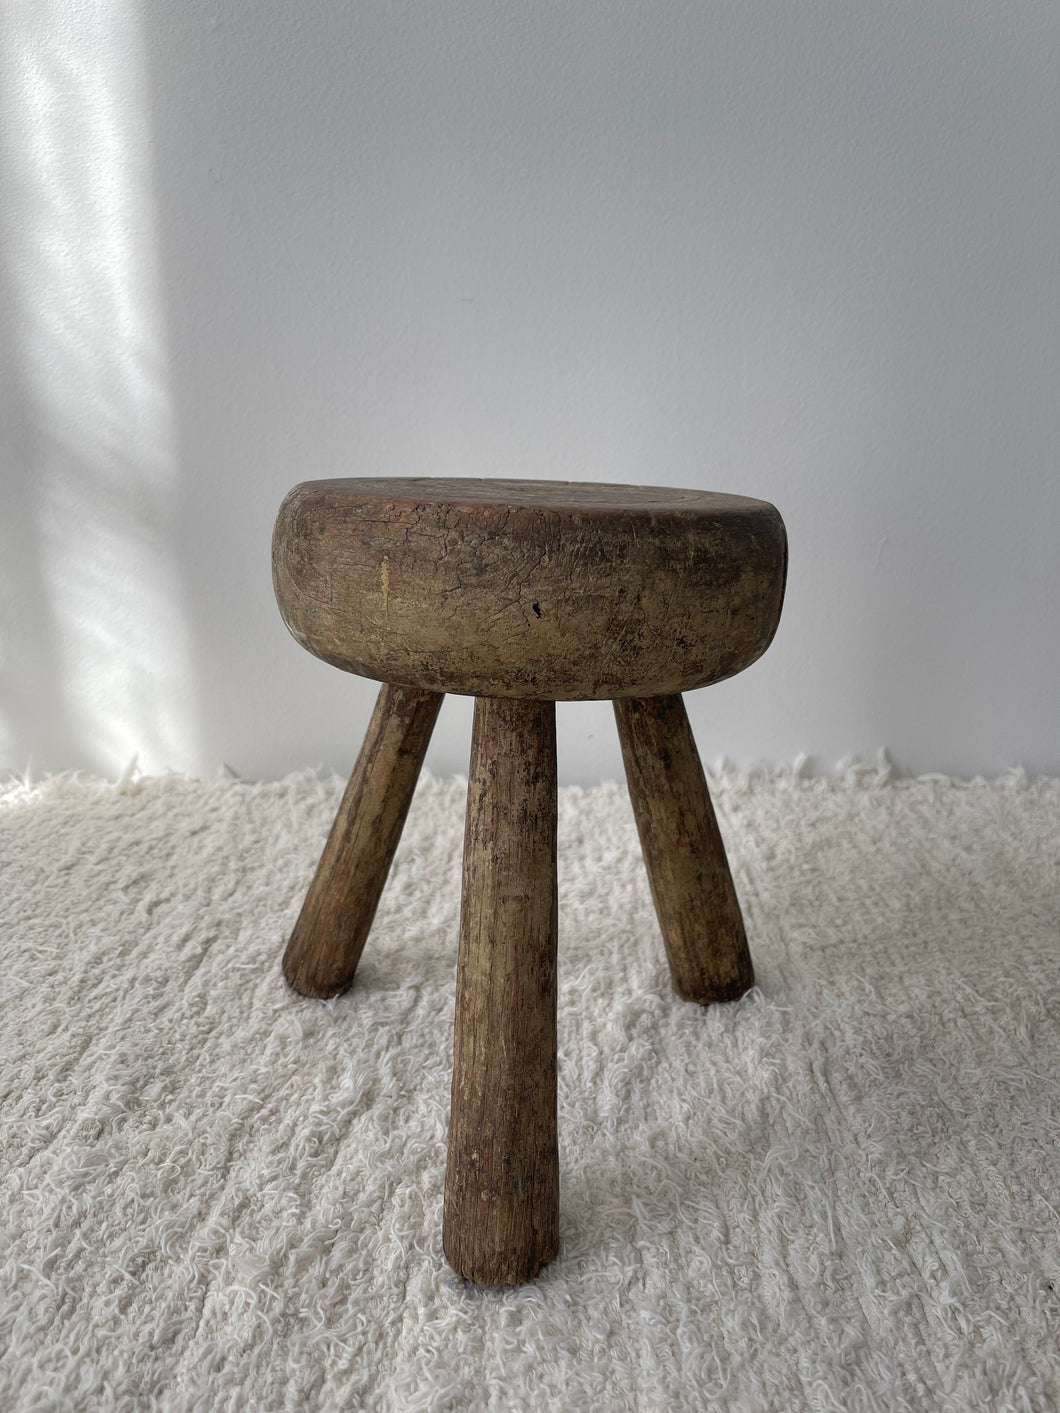 1800s Small Primitive Wooden Stool